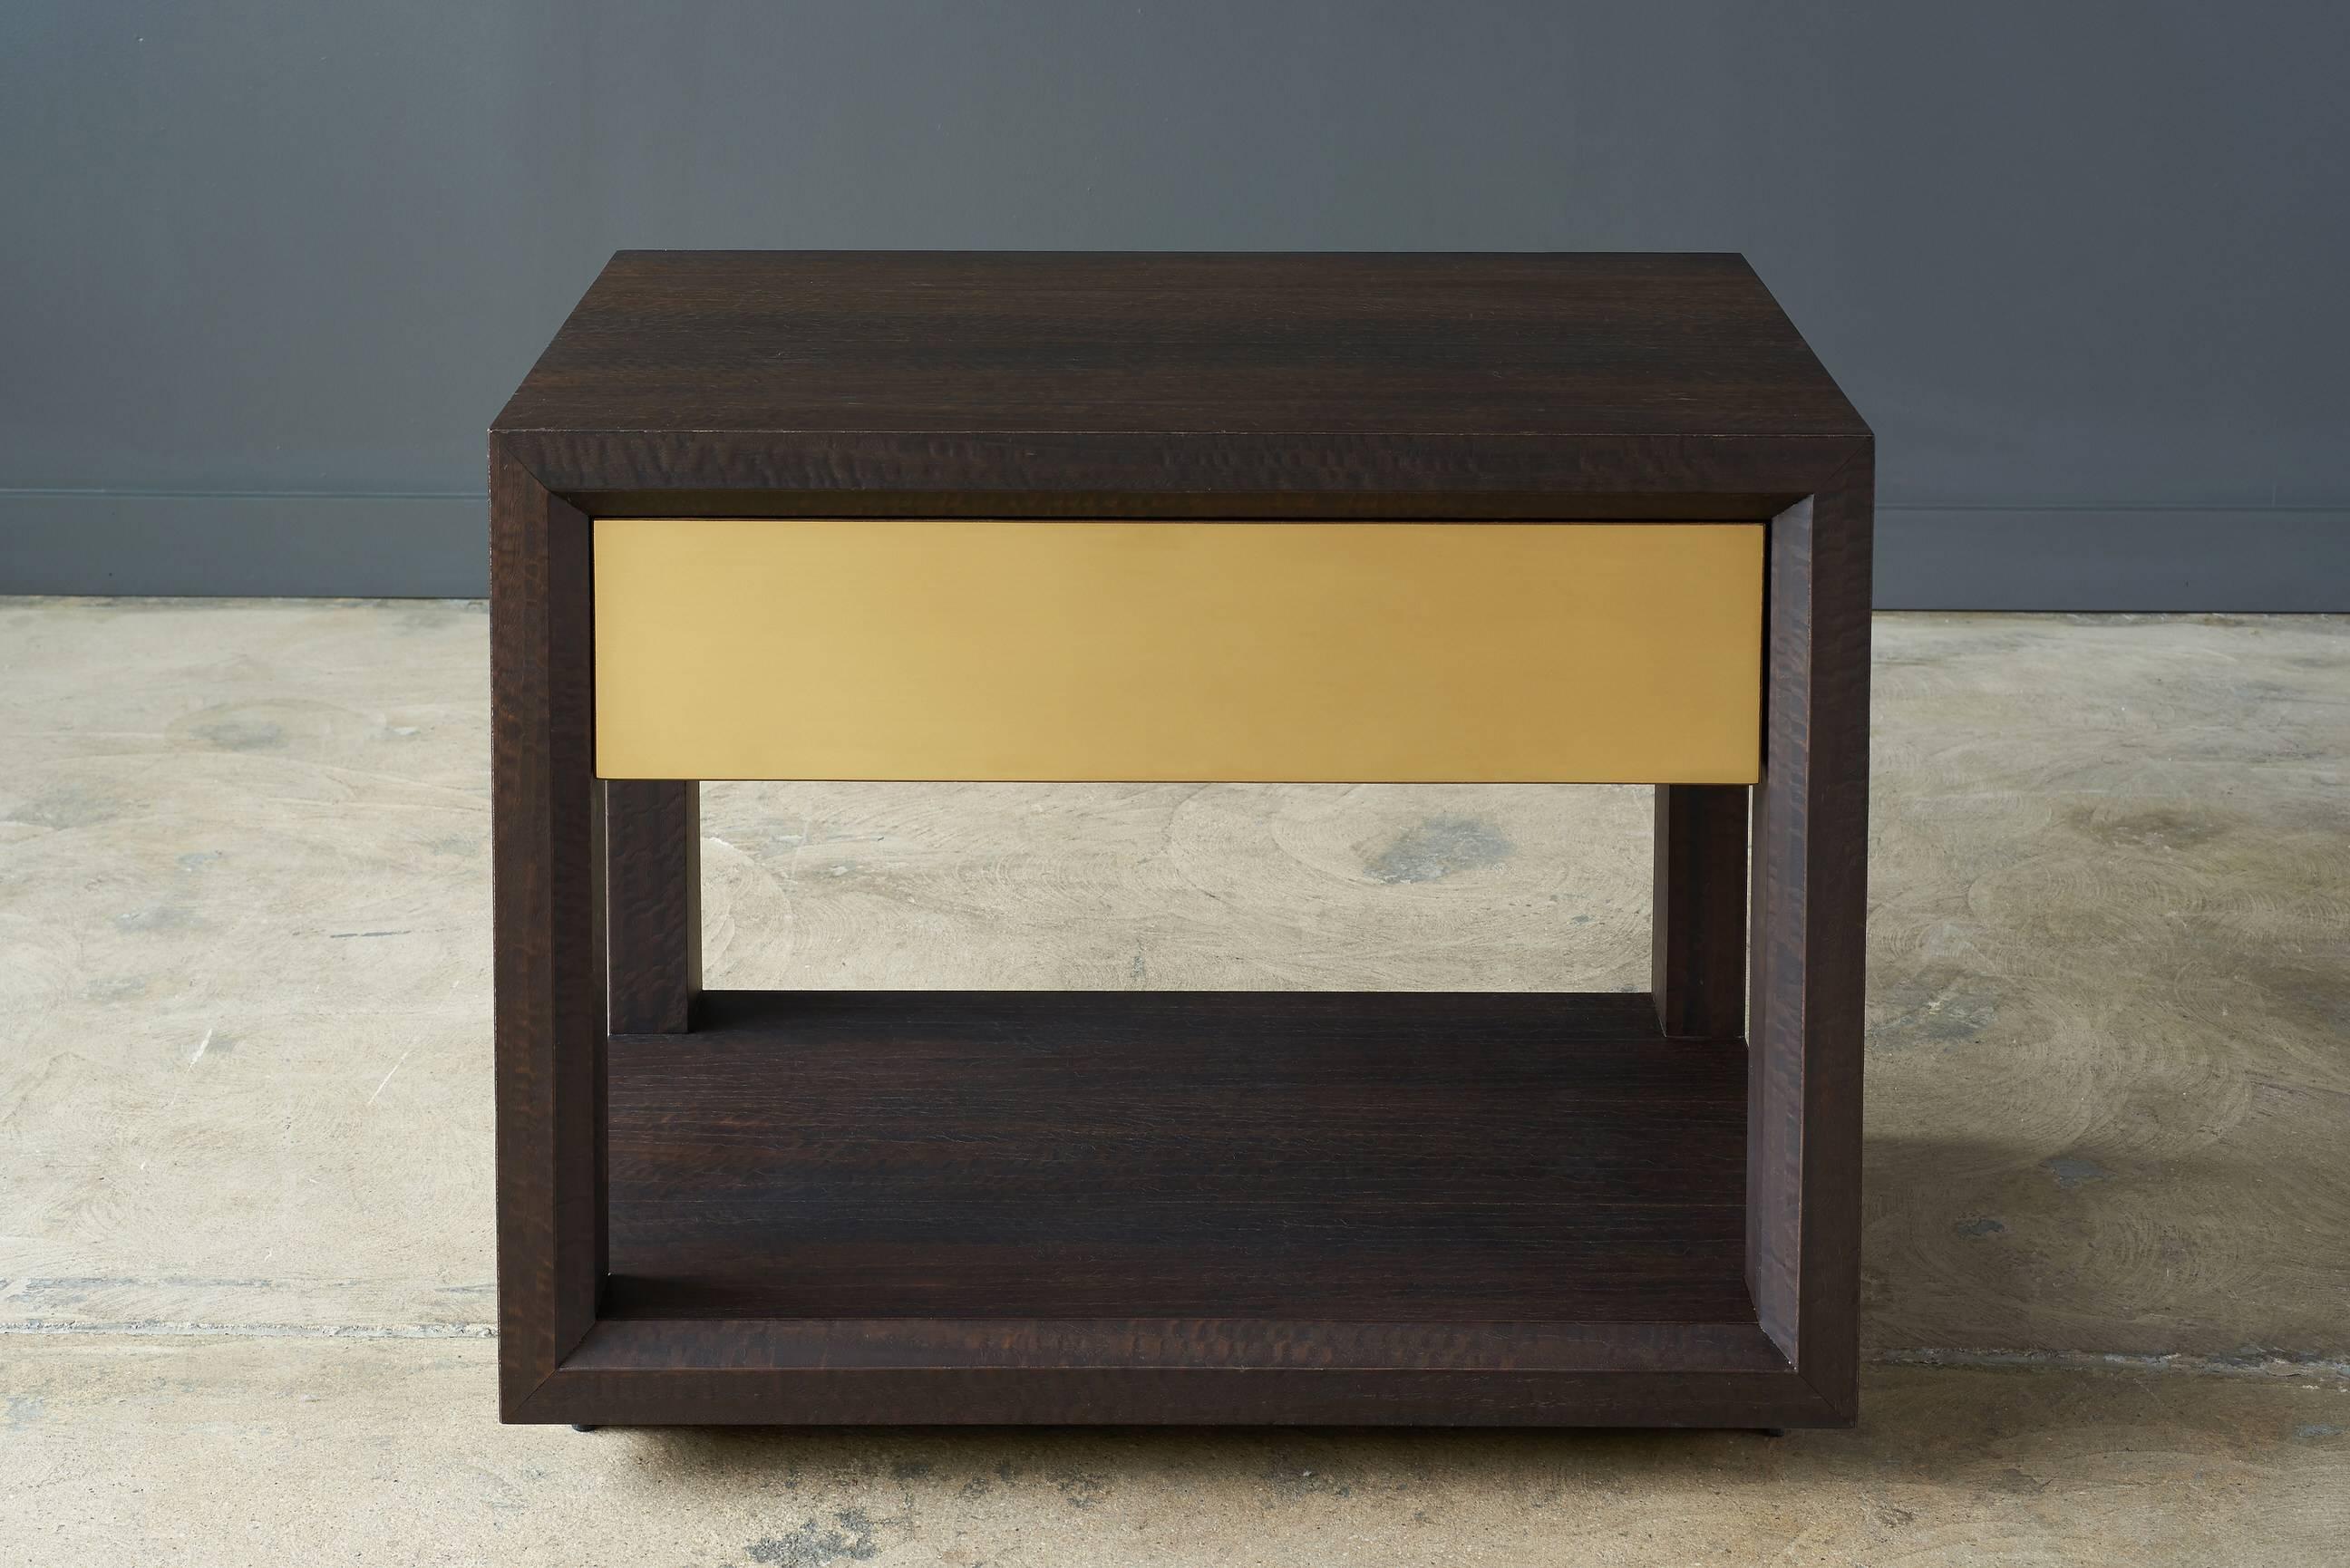 Shown in Burnt Elm Case, Matte Brass Drawer Front and Base. 
Measures: 30" x 20" x 24" H.

Each Desiron piece is handcrafted in the U.S.A., fully customizable and available in a variety of finishes.